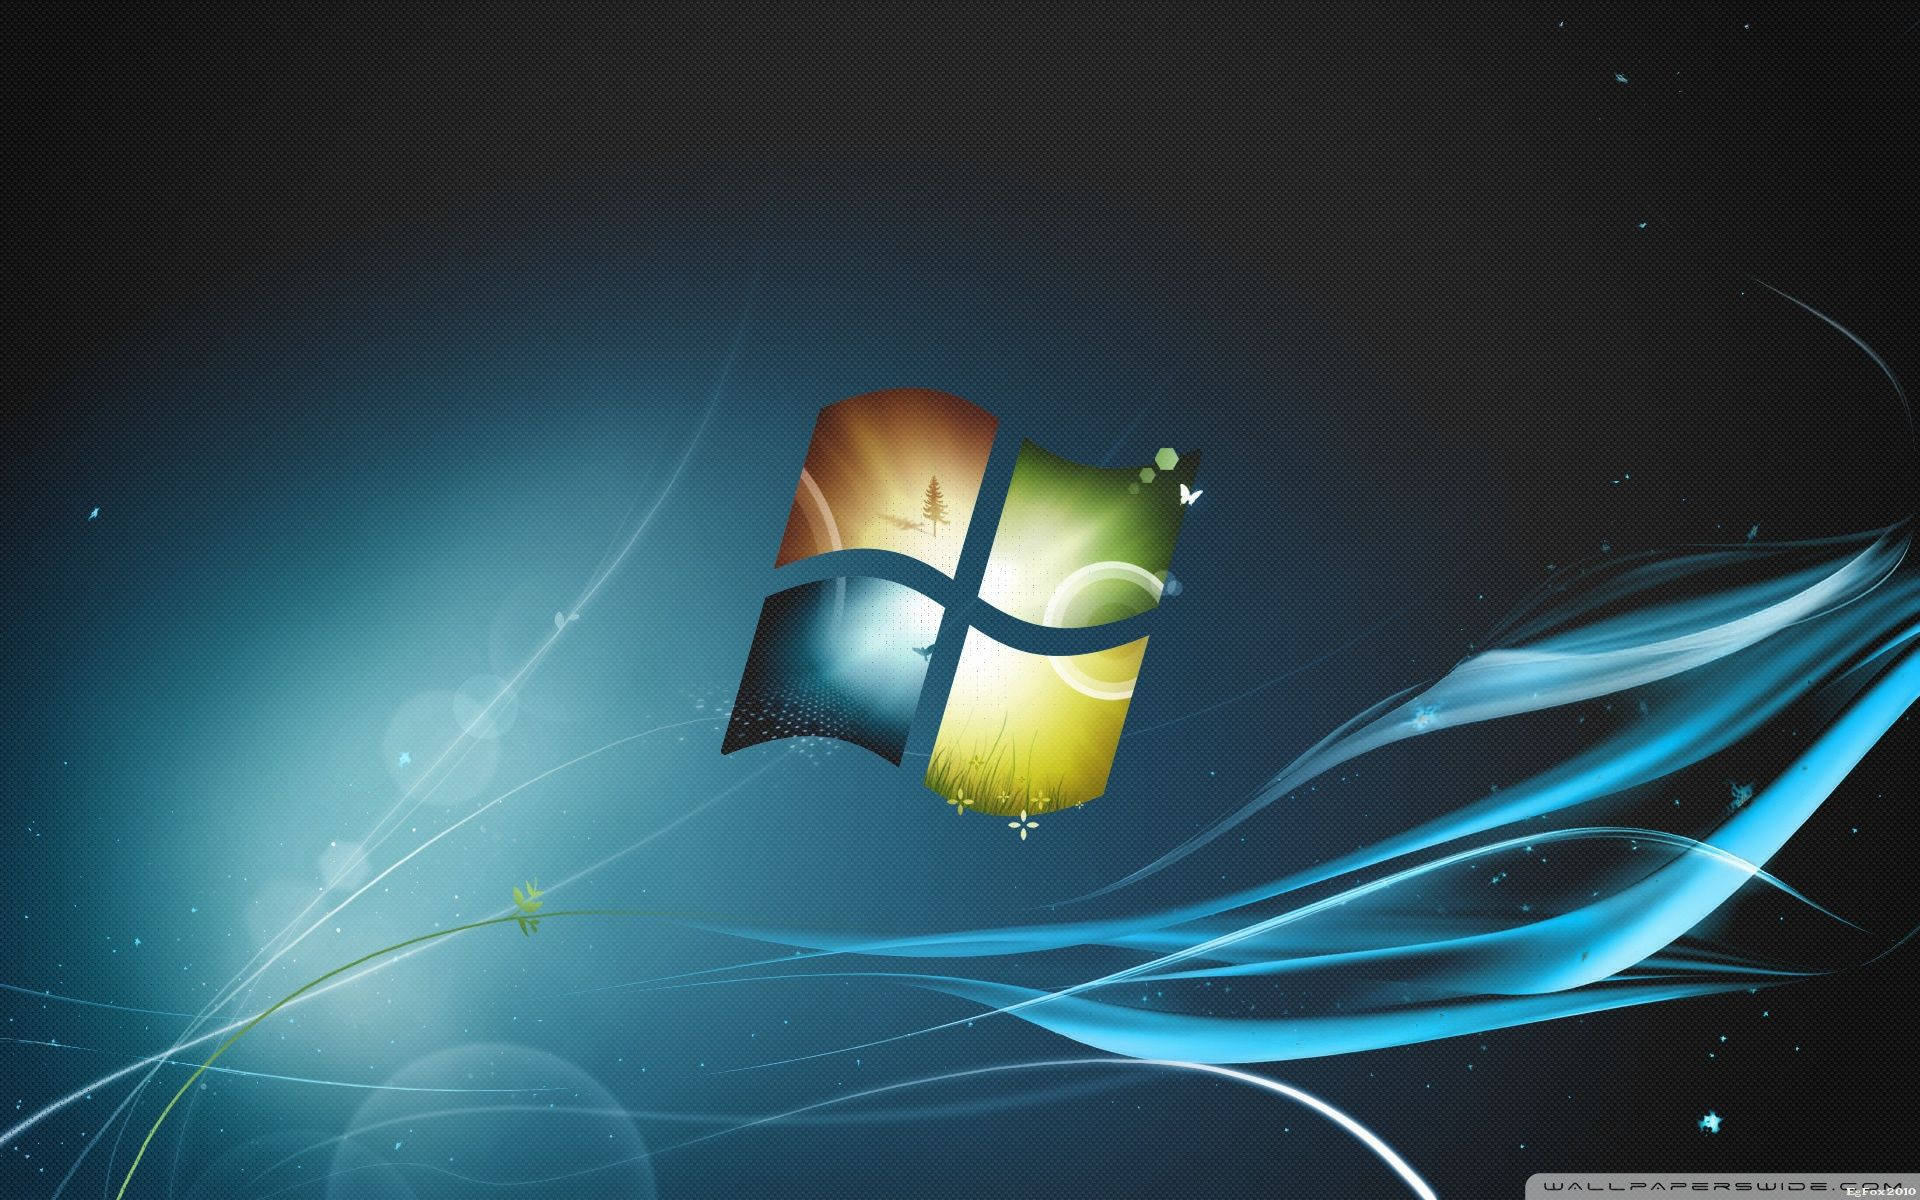 Windows 7 wallpaper with the colorful background - Windows 10